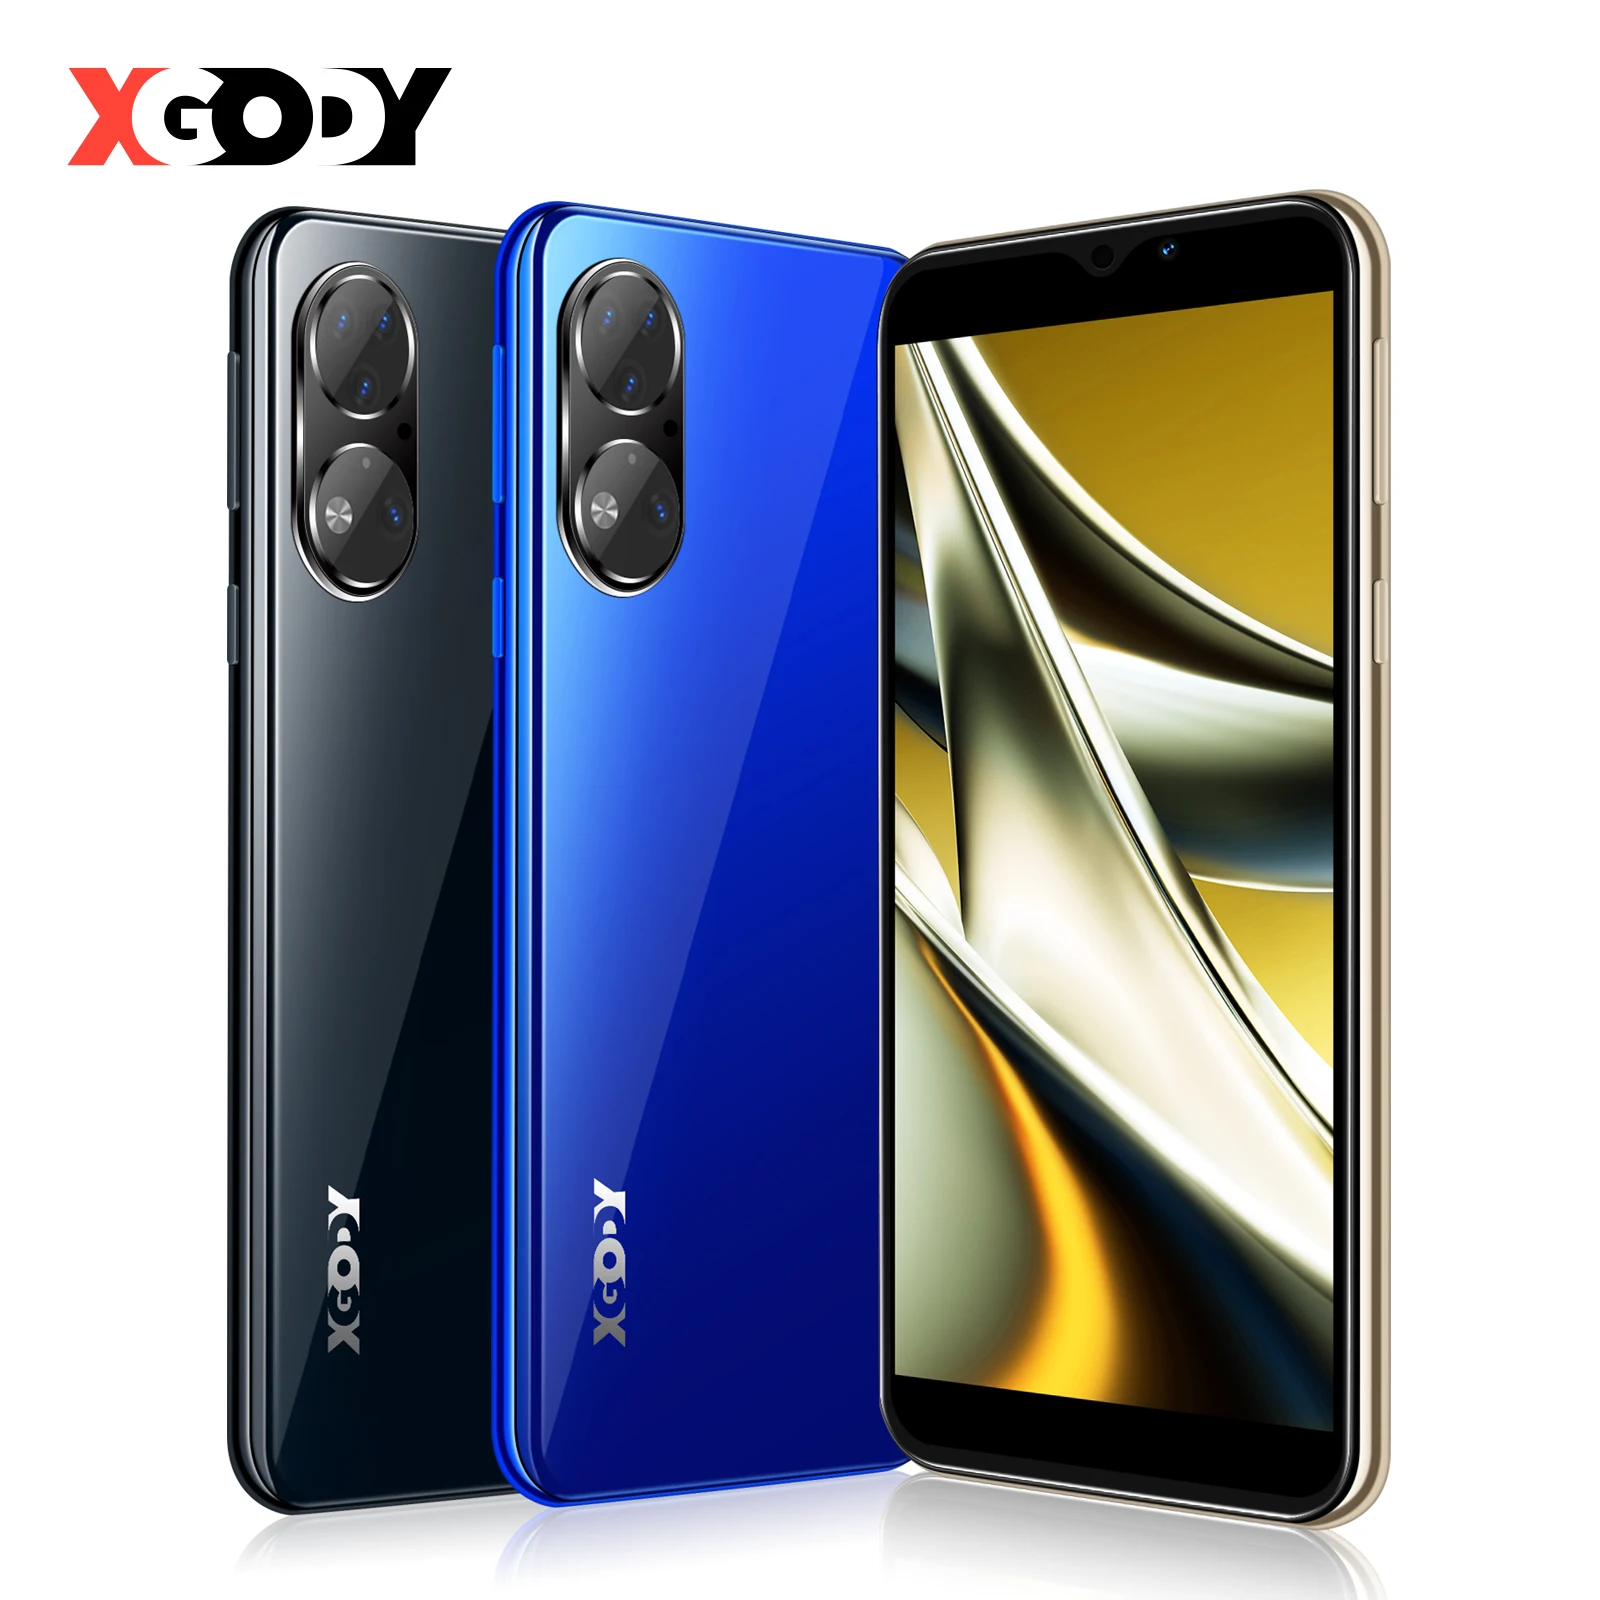 

XGODY 4G LTE Face ID Smartphone 6 Inch 13MP 2GB 32GB Smart Android 9.0 Unlocked Mobile Phone MTK6737 Quad Core 3500mAh Cellphone